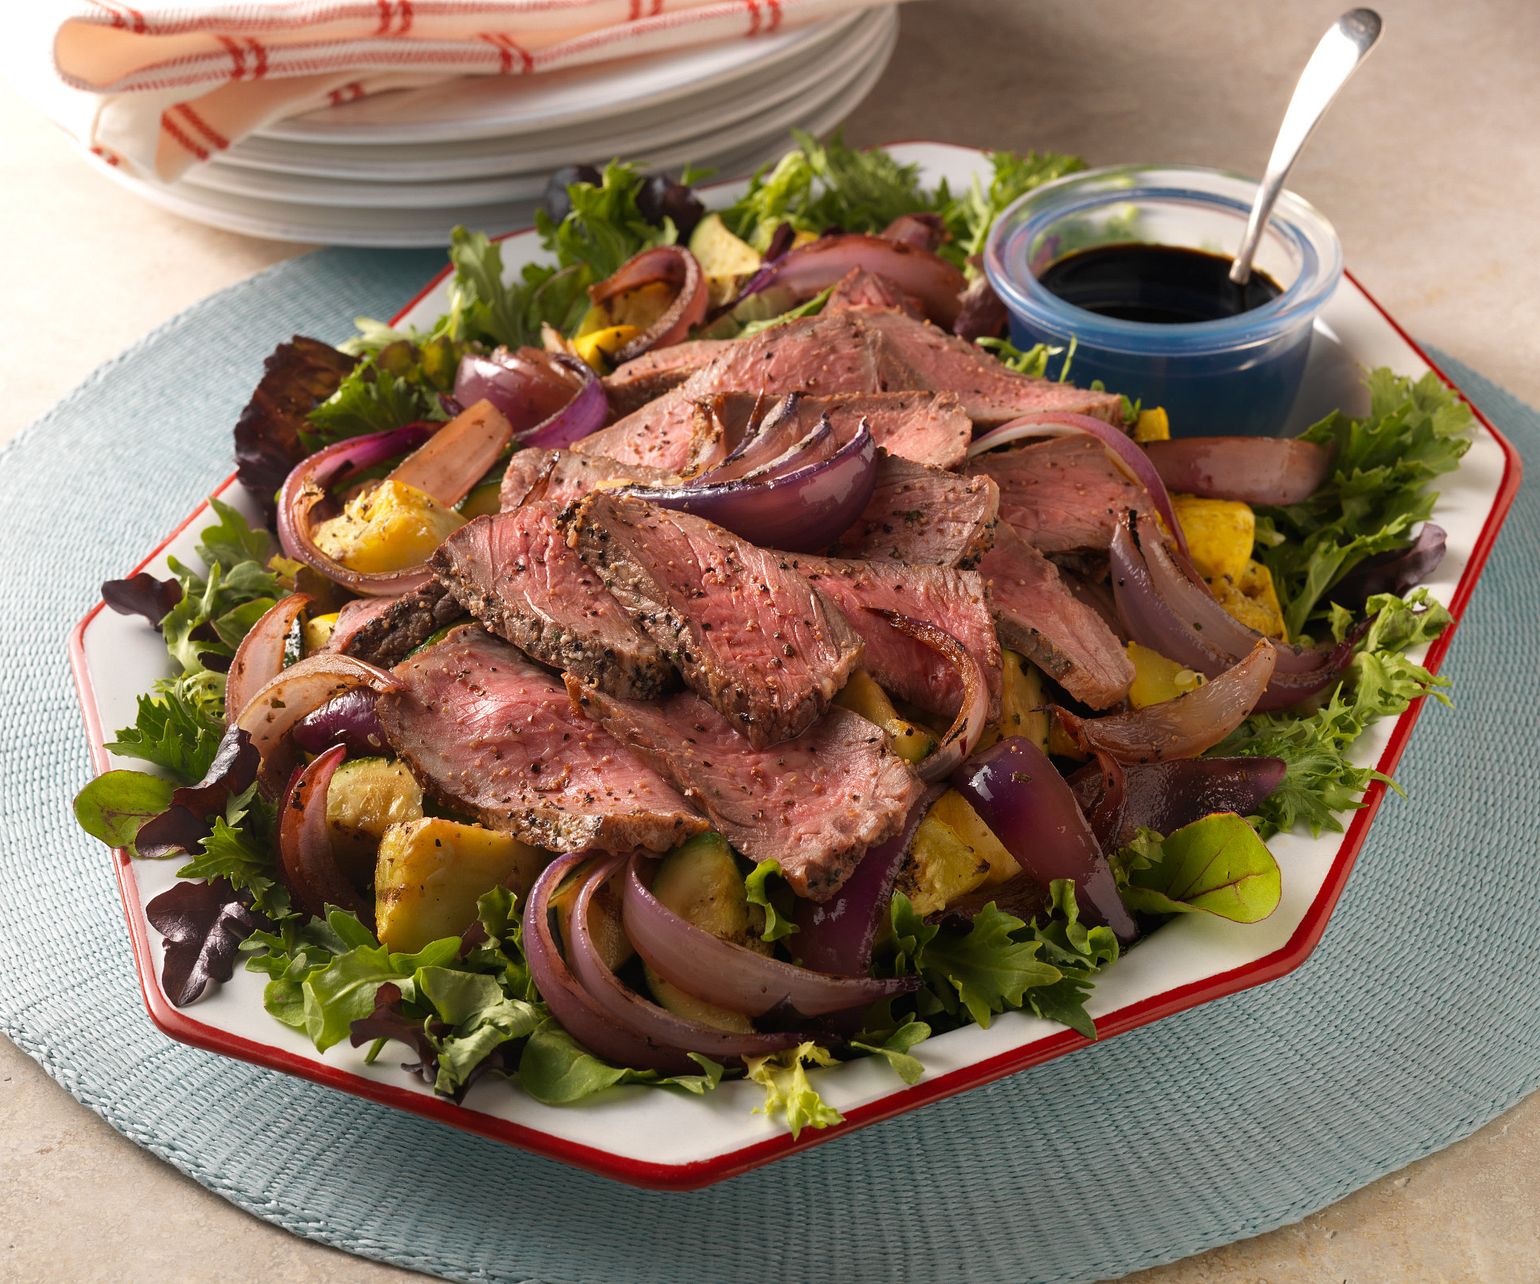 Grilled Beef, Summer Squash and Onion Salad